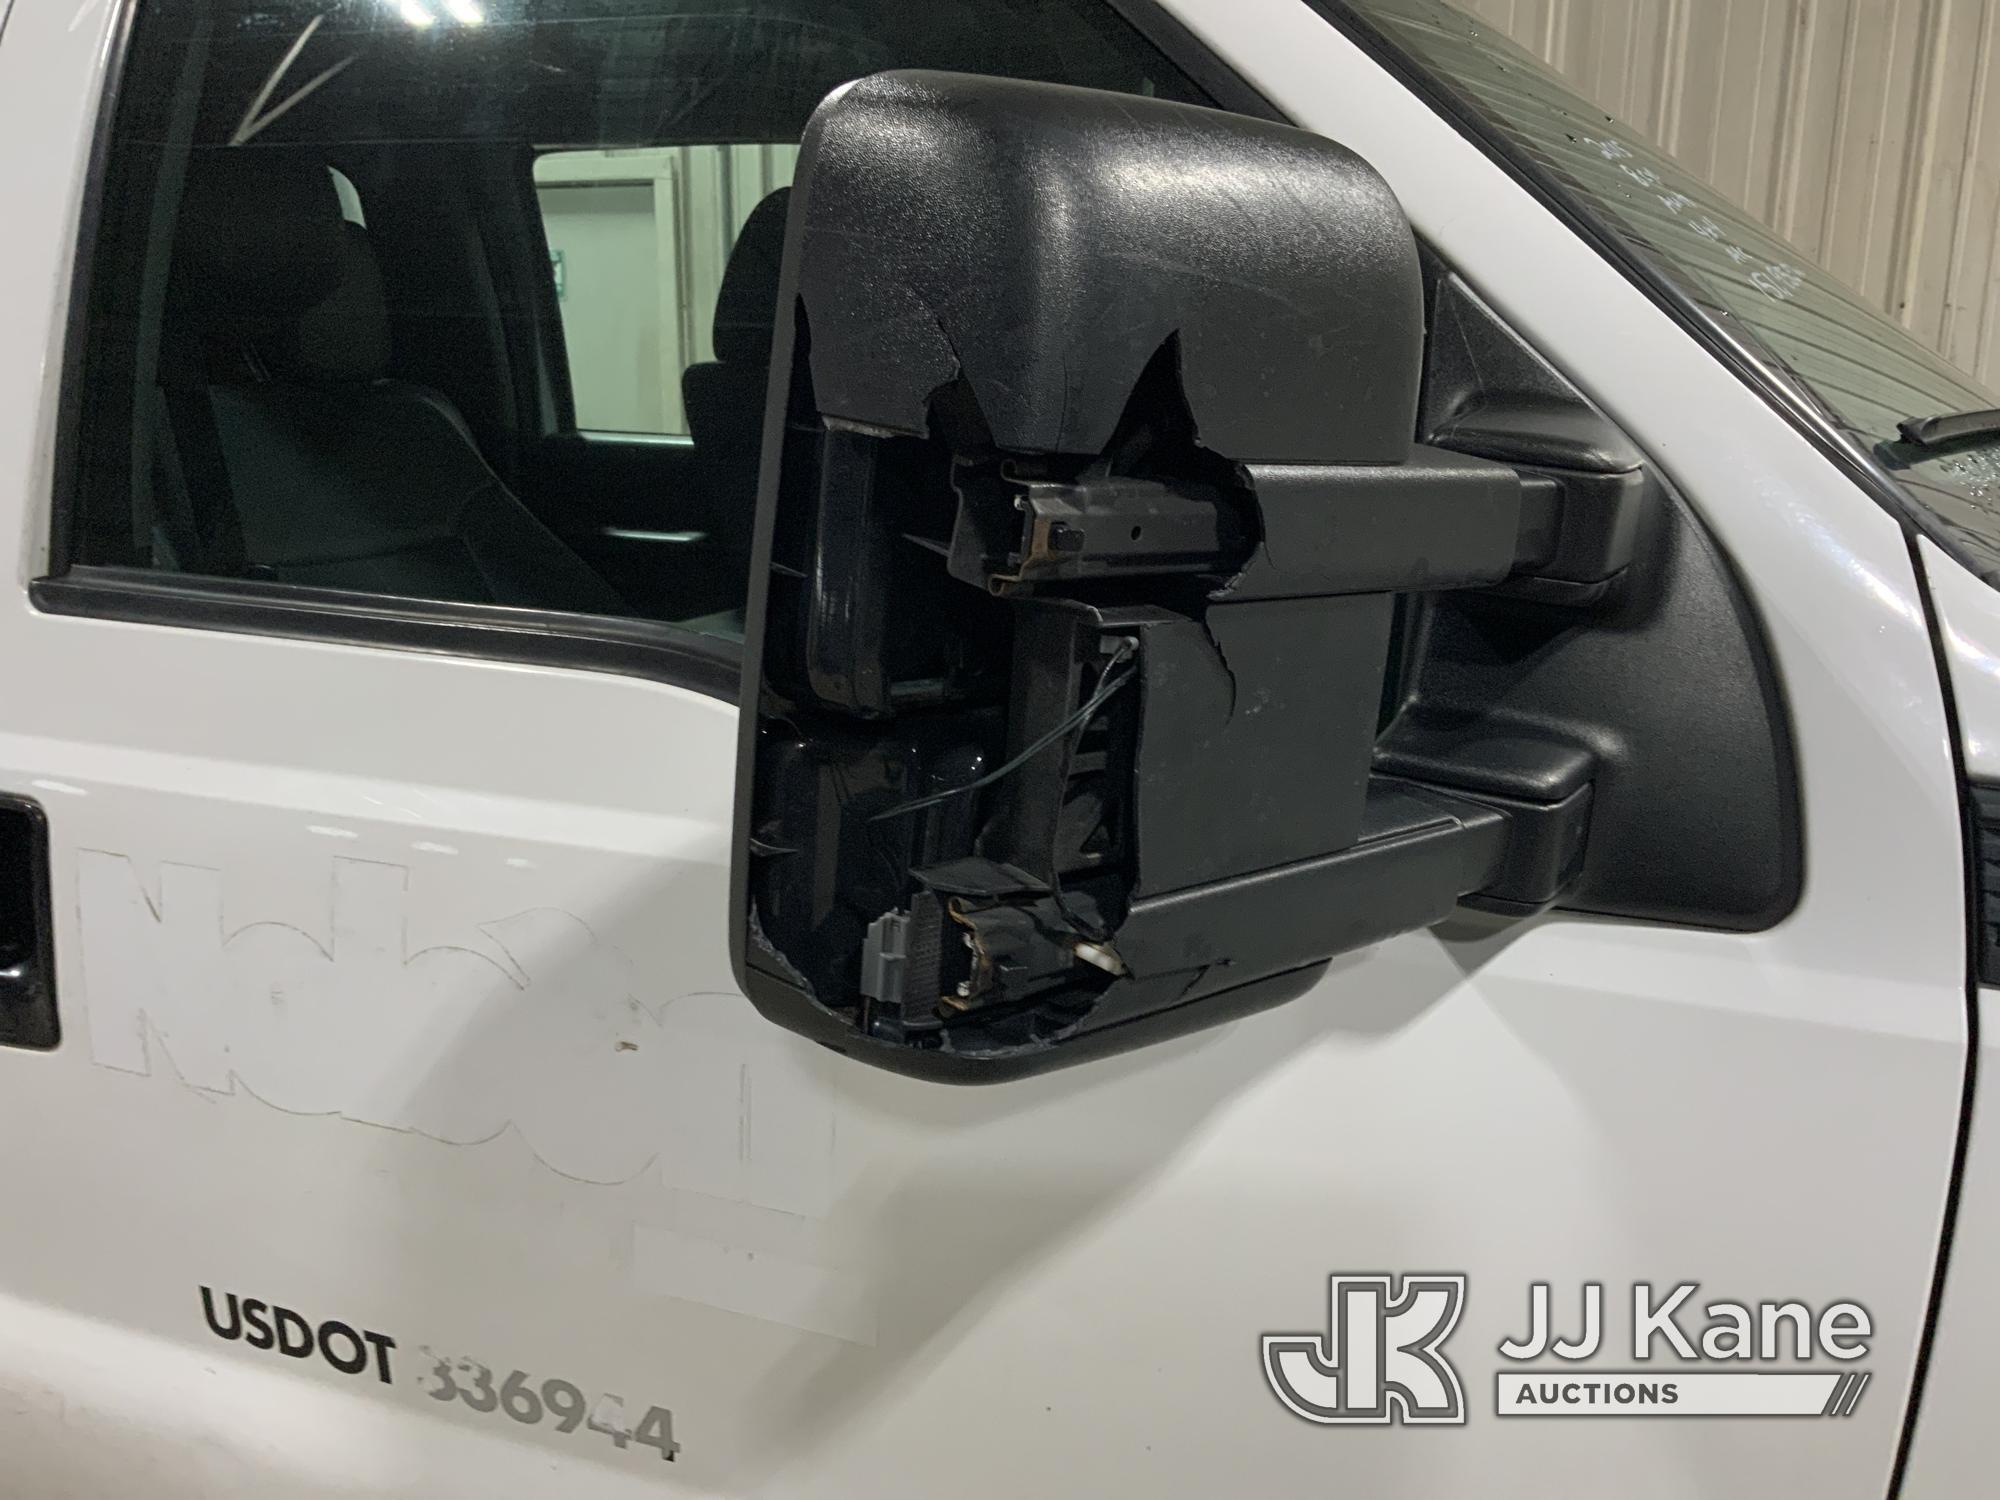 (Fort Wayne, IN) 2015 Ford F250 4x4 Crew-Cab Pickup Truck Runs & Moves) (Check Engine Light On, Body